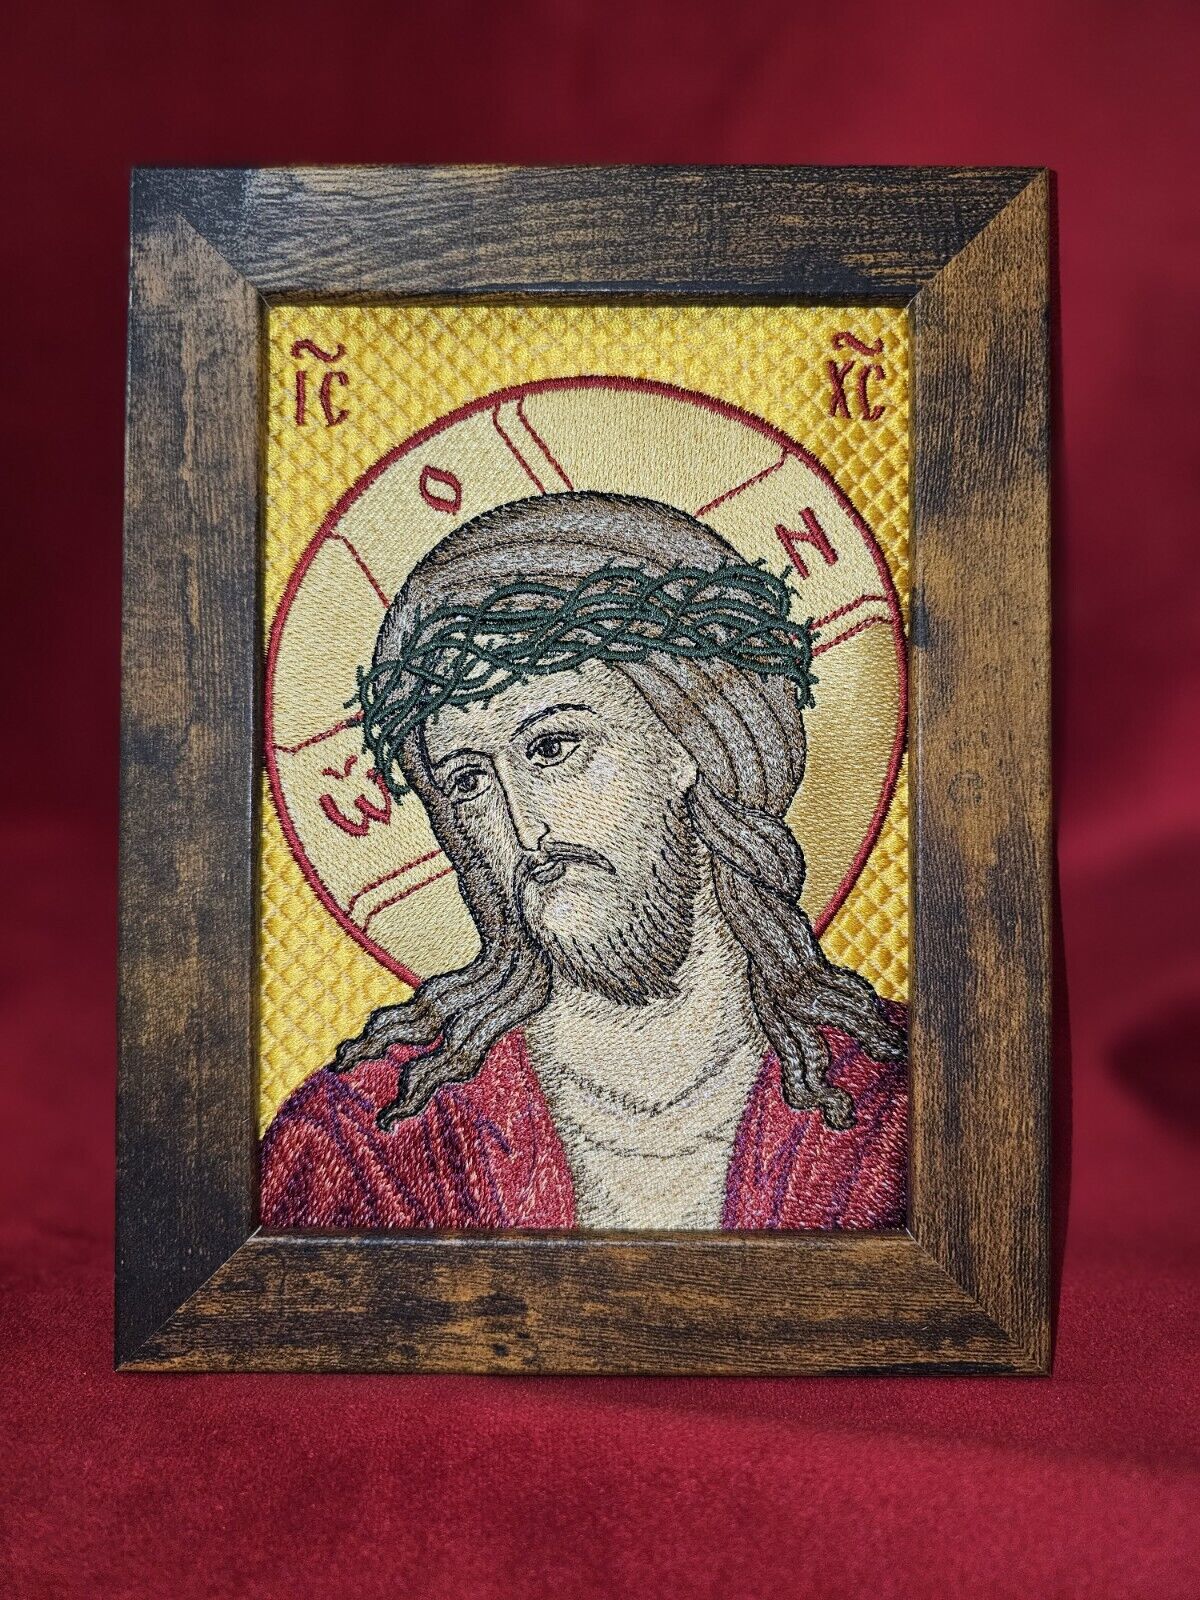 5x7 Embroidered The Passion of Jesus Christ Byzantine Orthodox Christian Icon